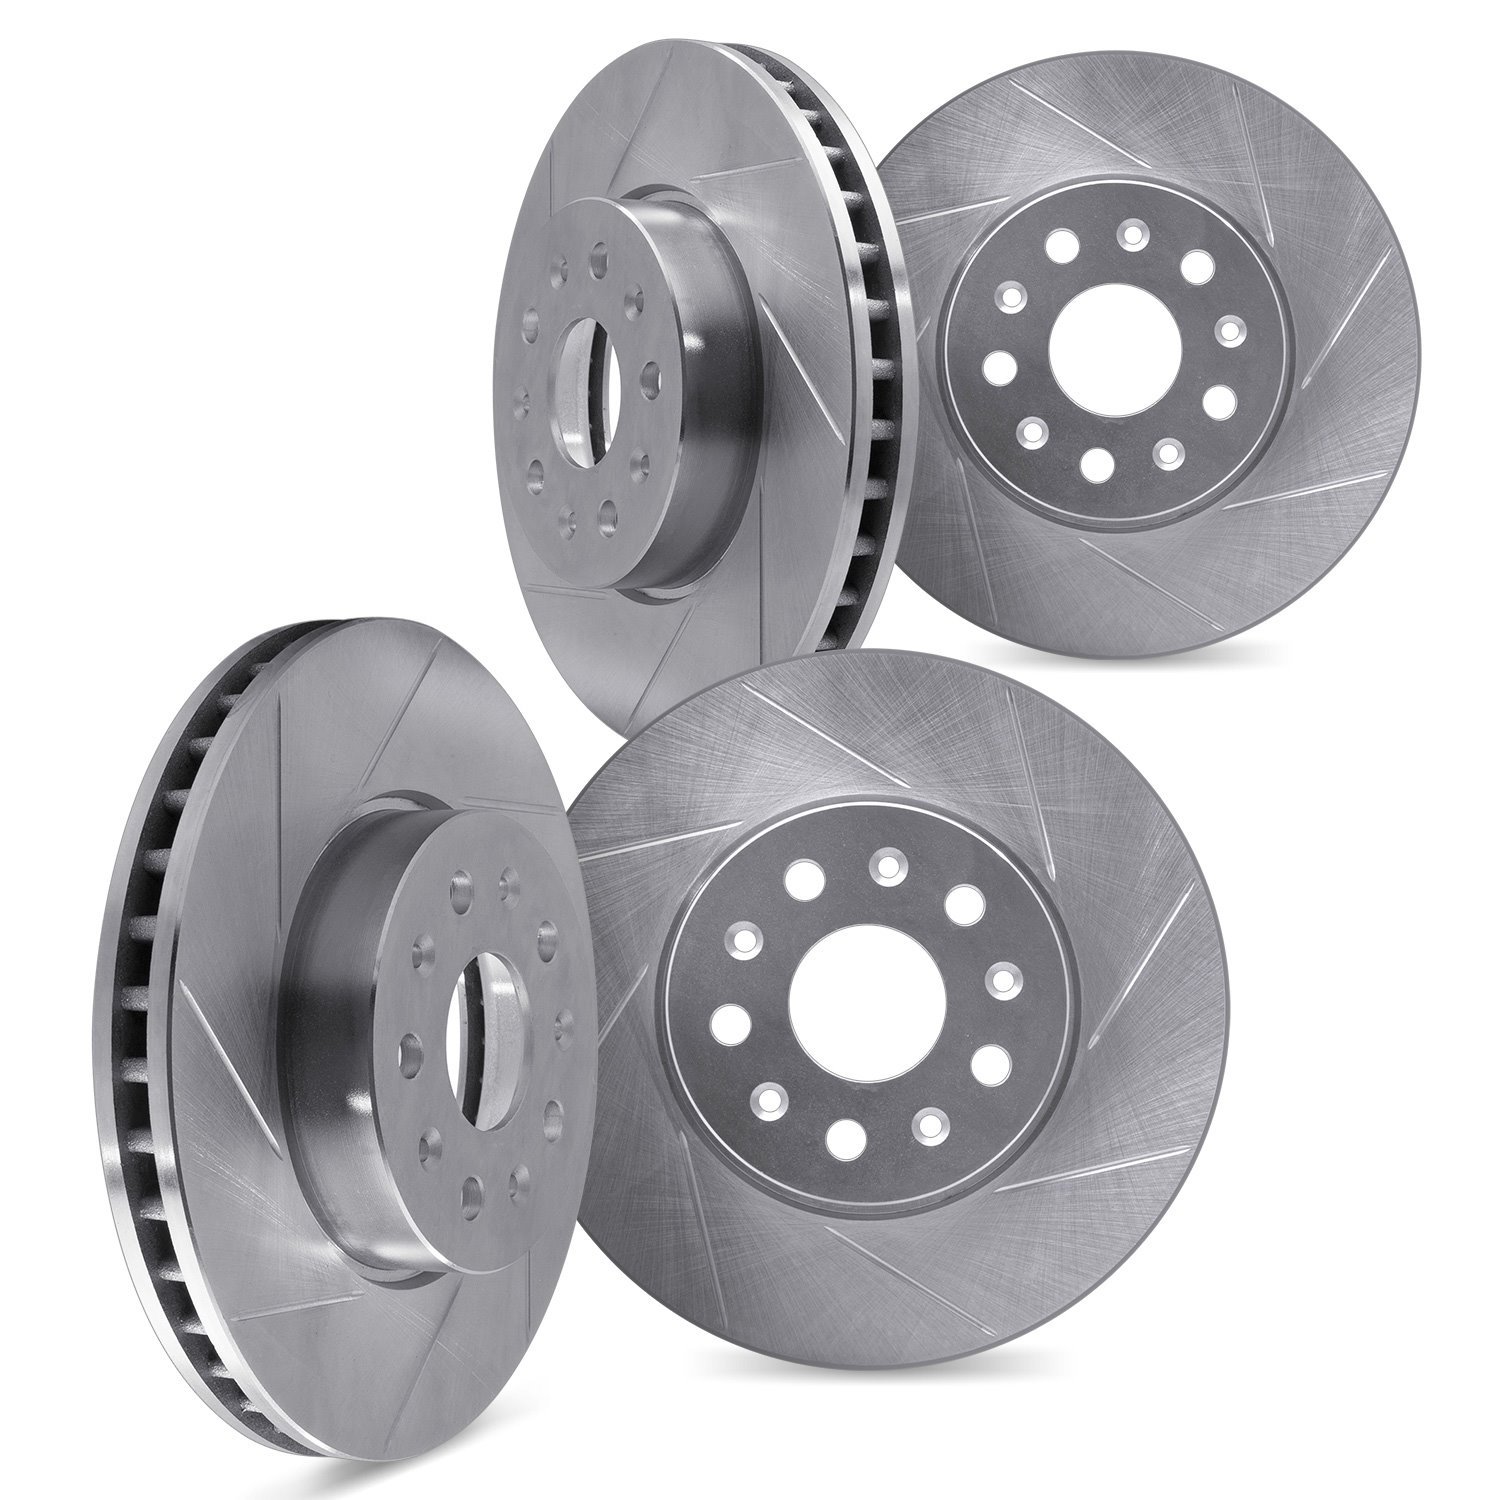 Slotted Brake Rotors [Silver], Fits Select Lexus/Toyota/Scion